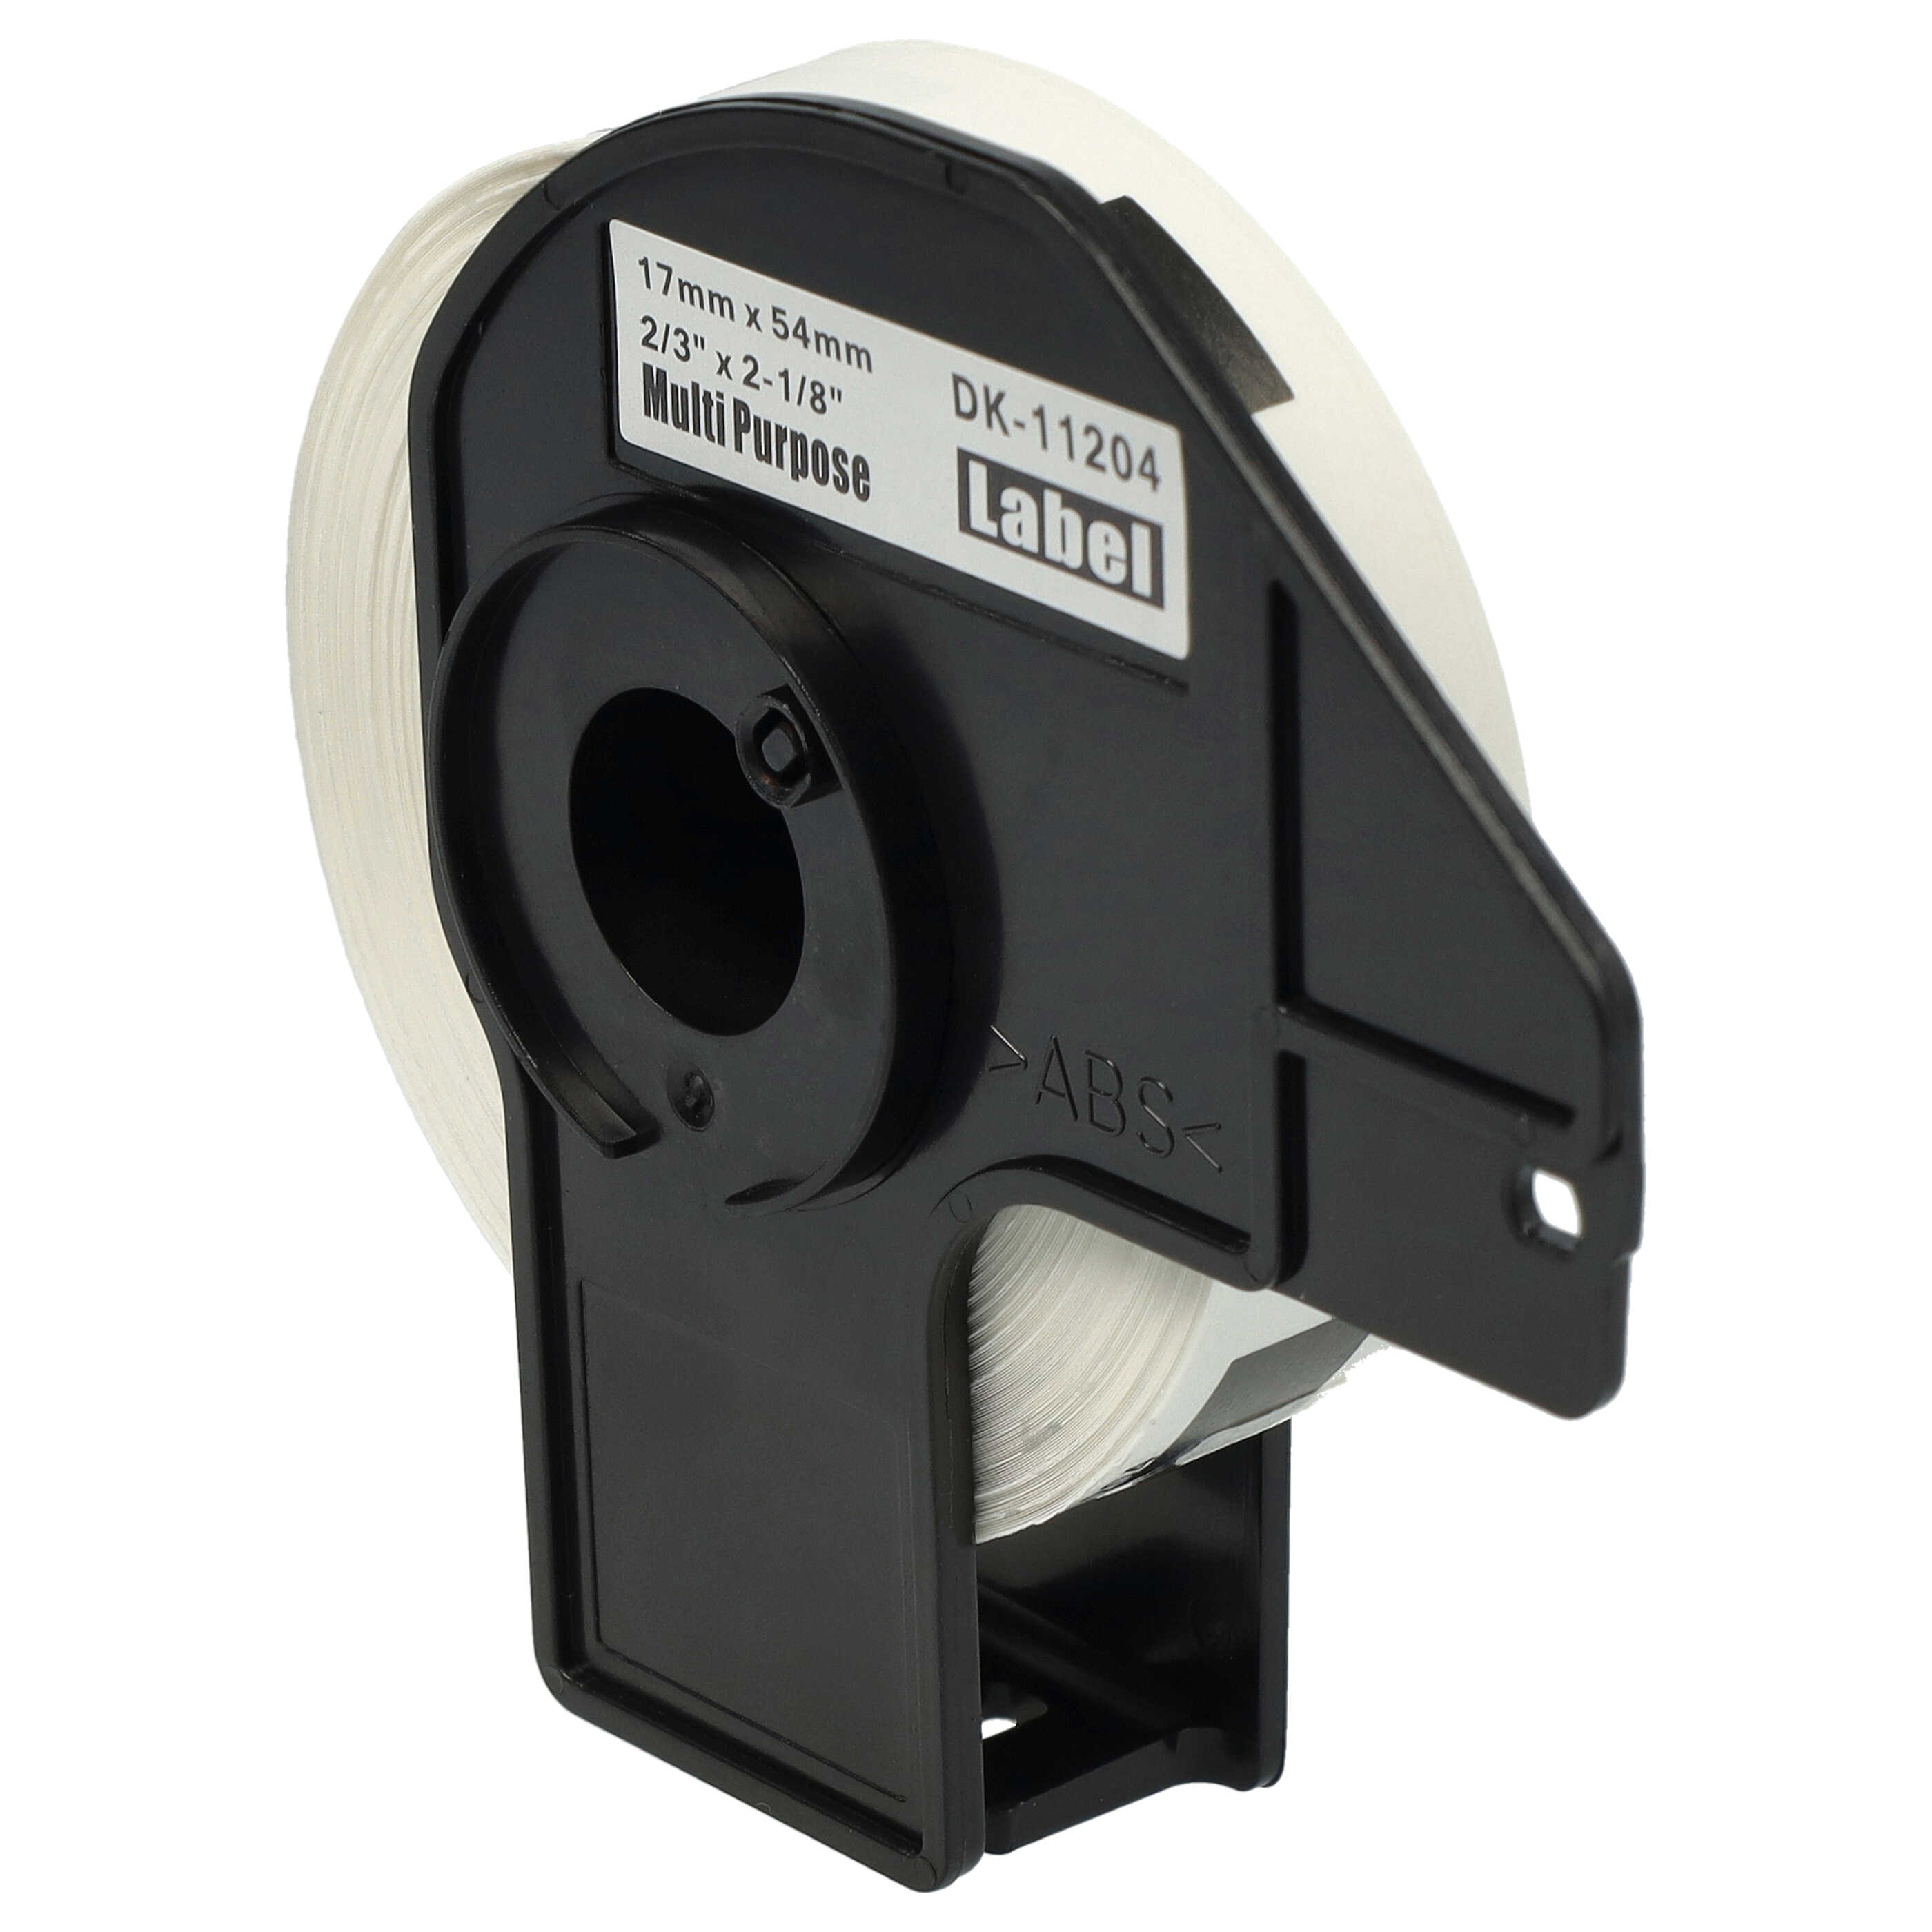 Labels replaces Brother DK-11204 for Labeller - 17 mm x 54 mm + Holder